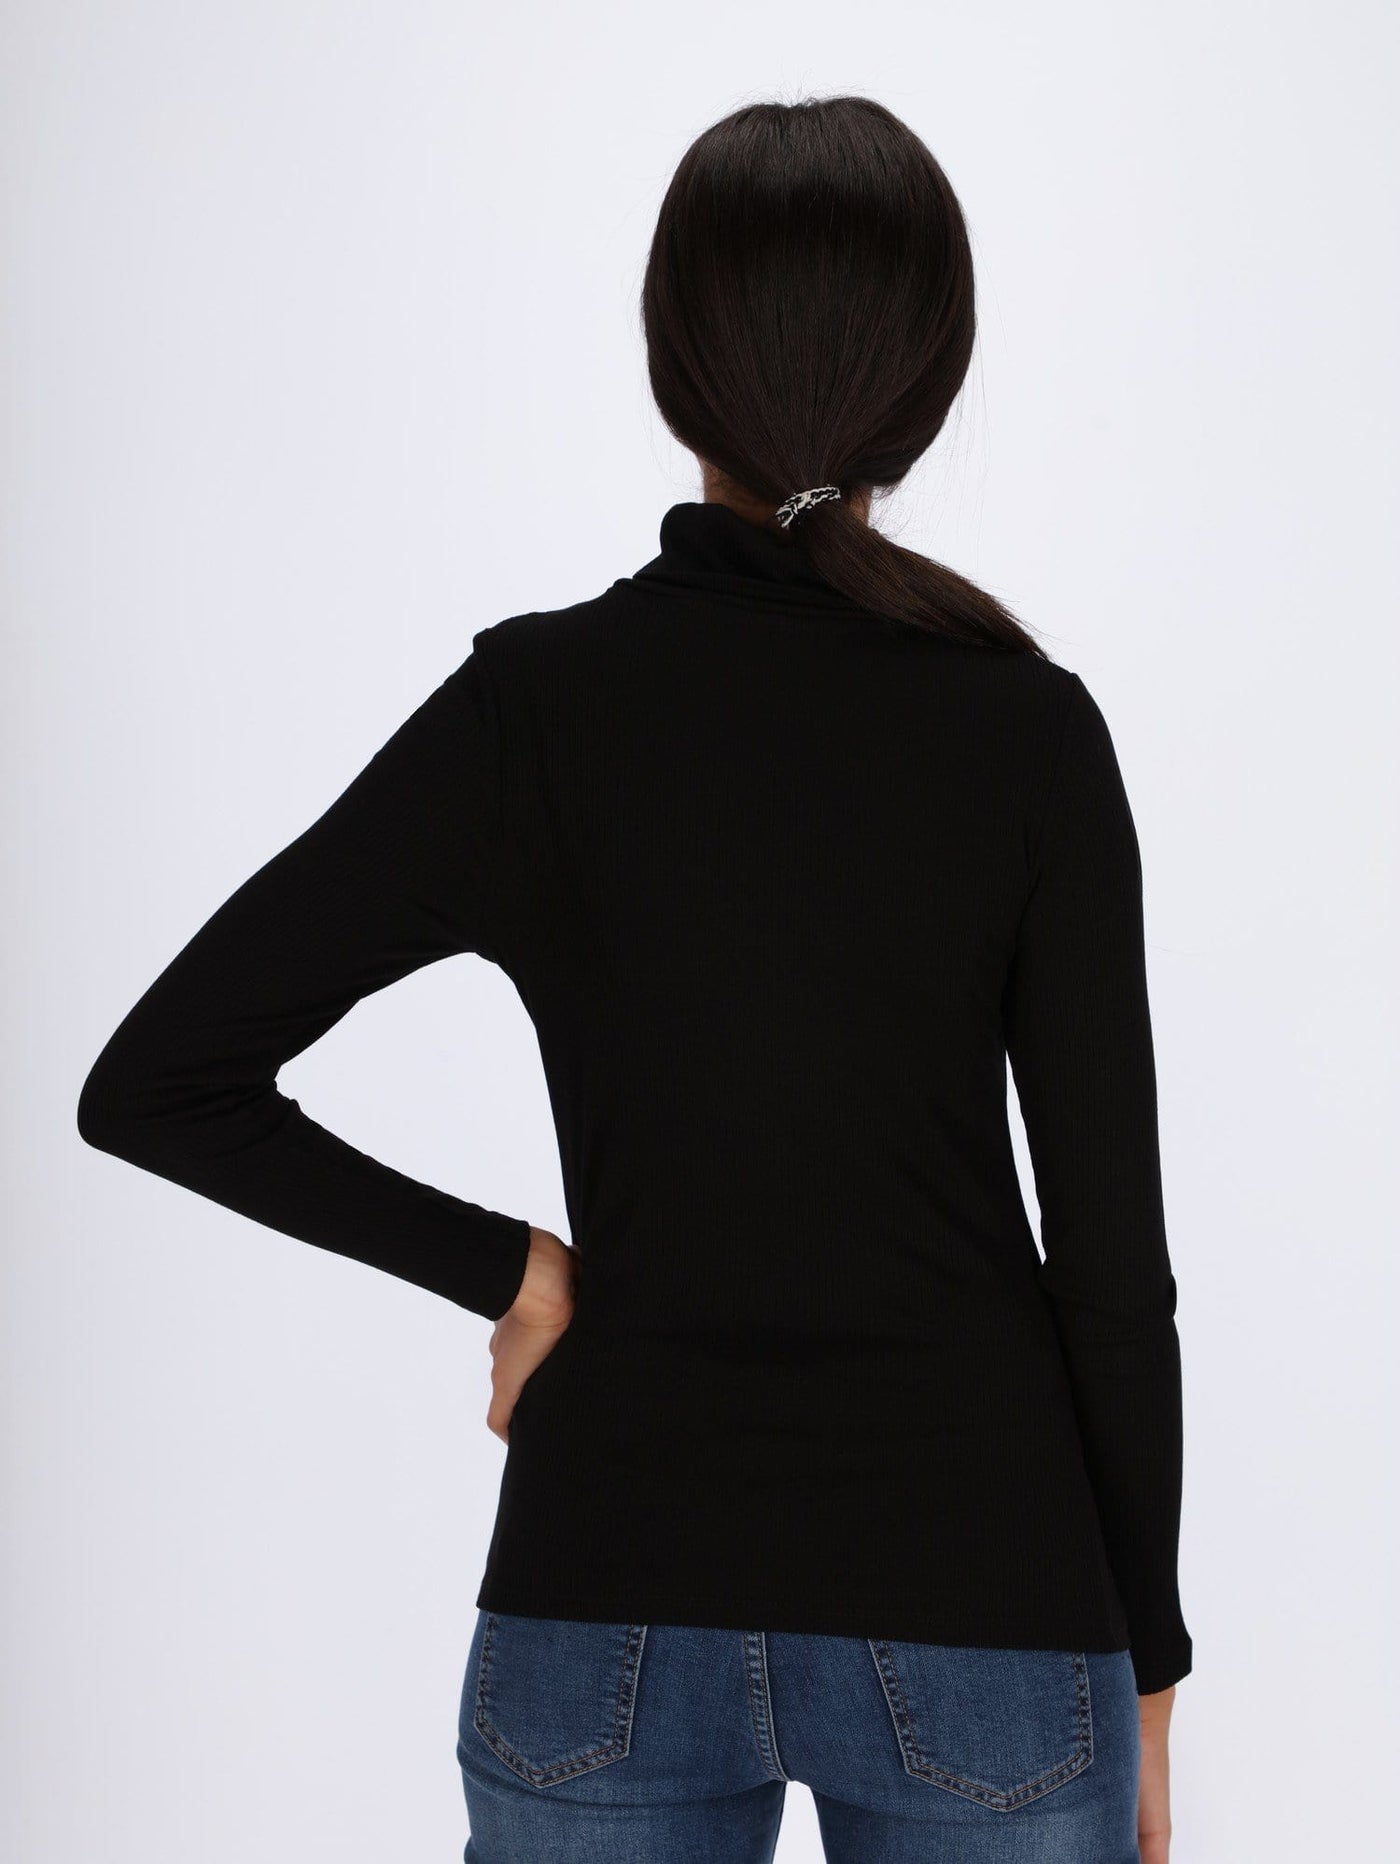 OR Tops & Blouses Ribbed Turtle Neck Top with Long Sleeves